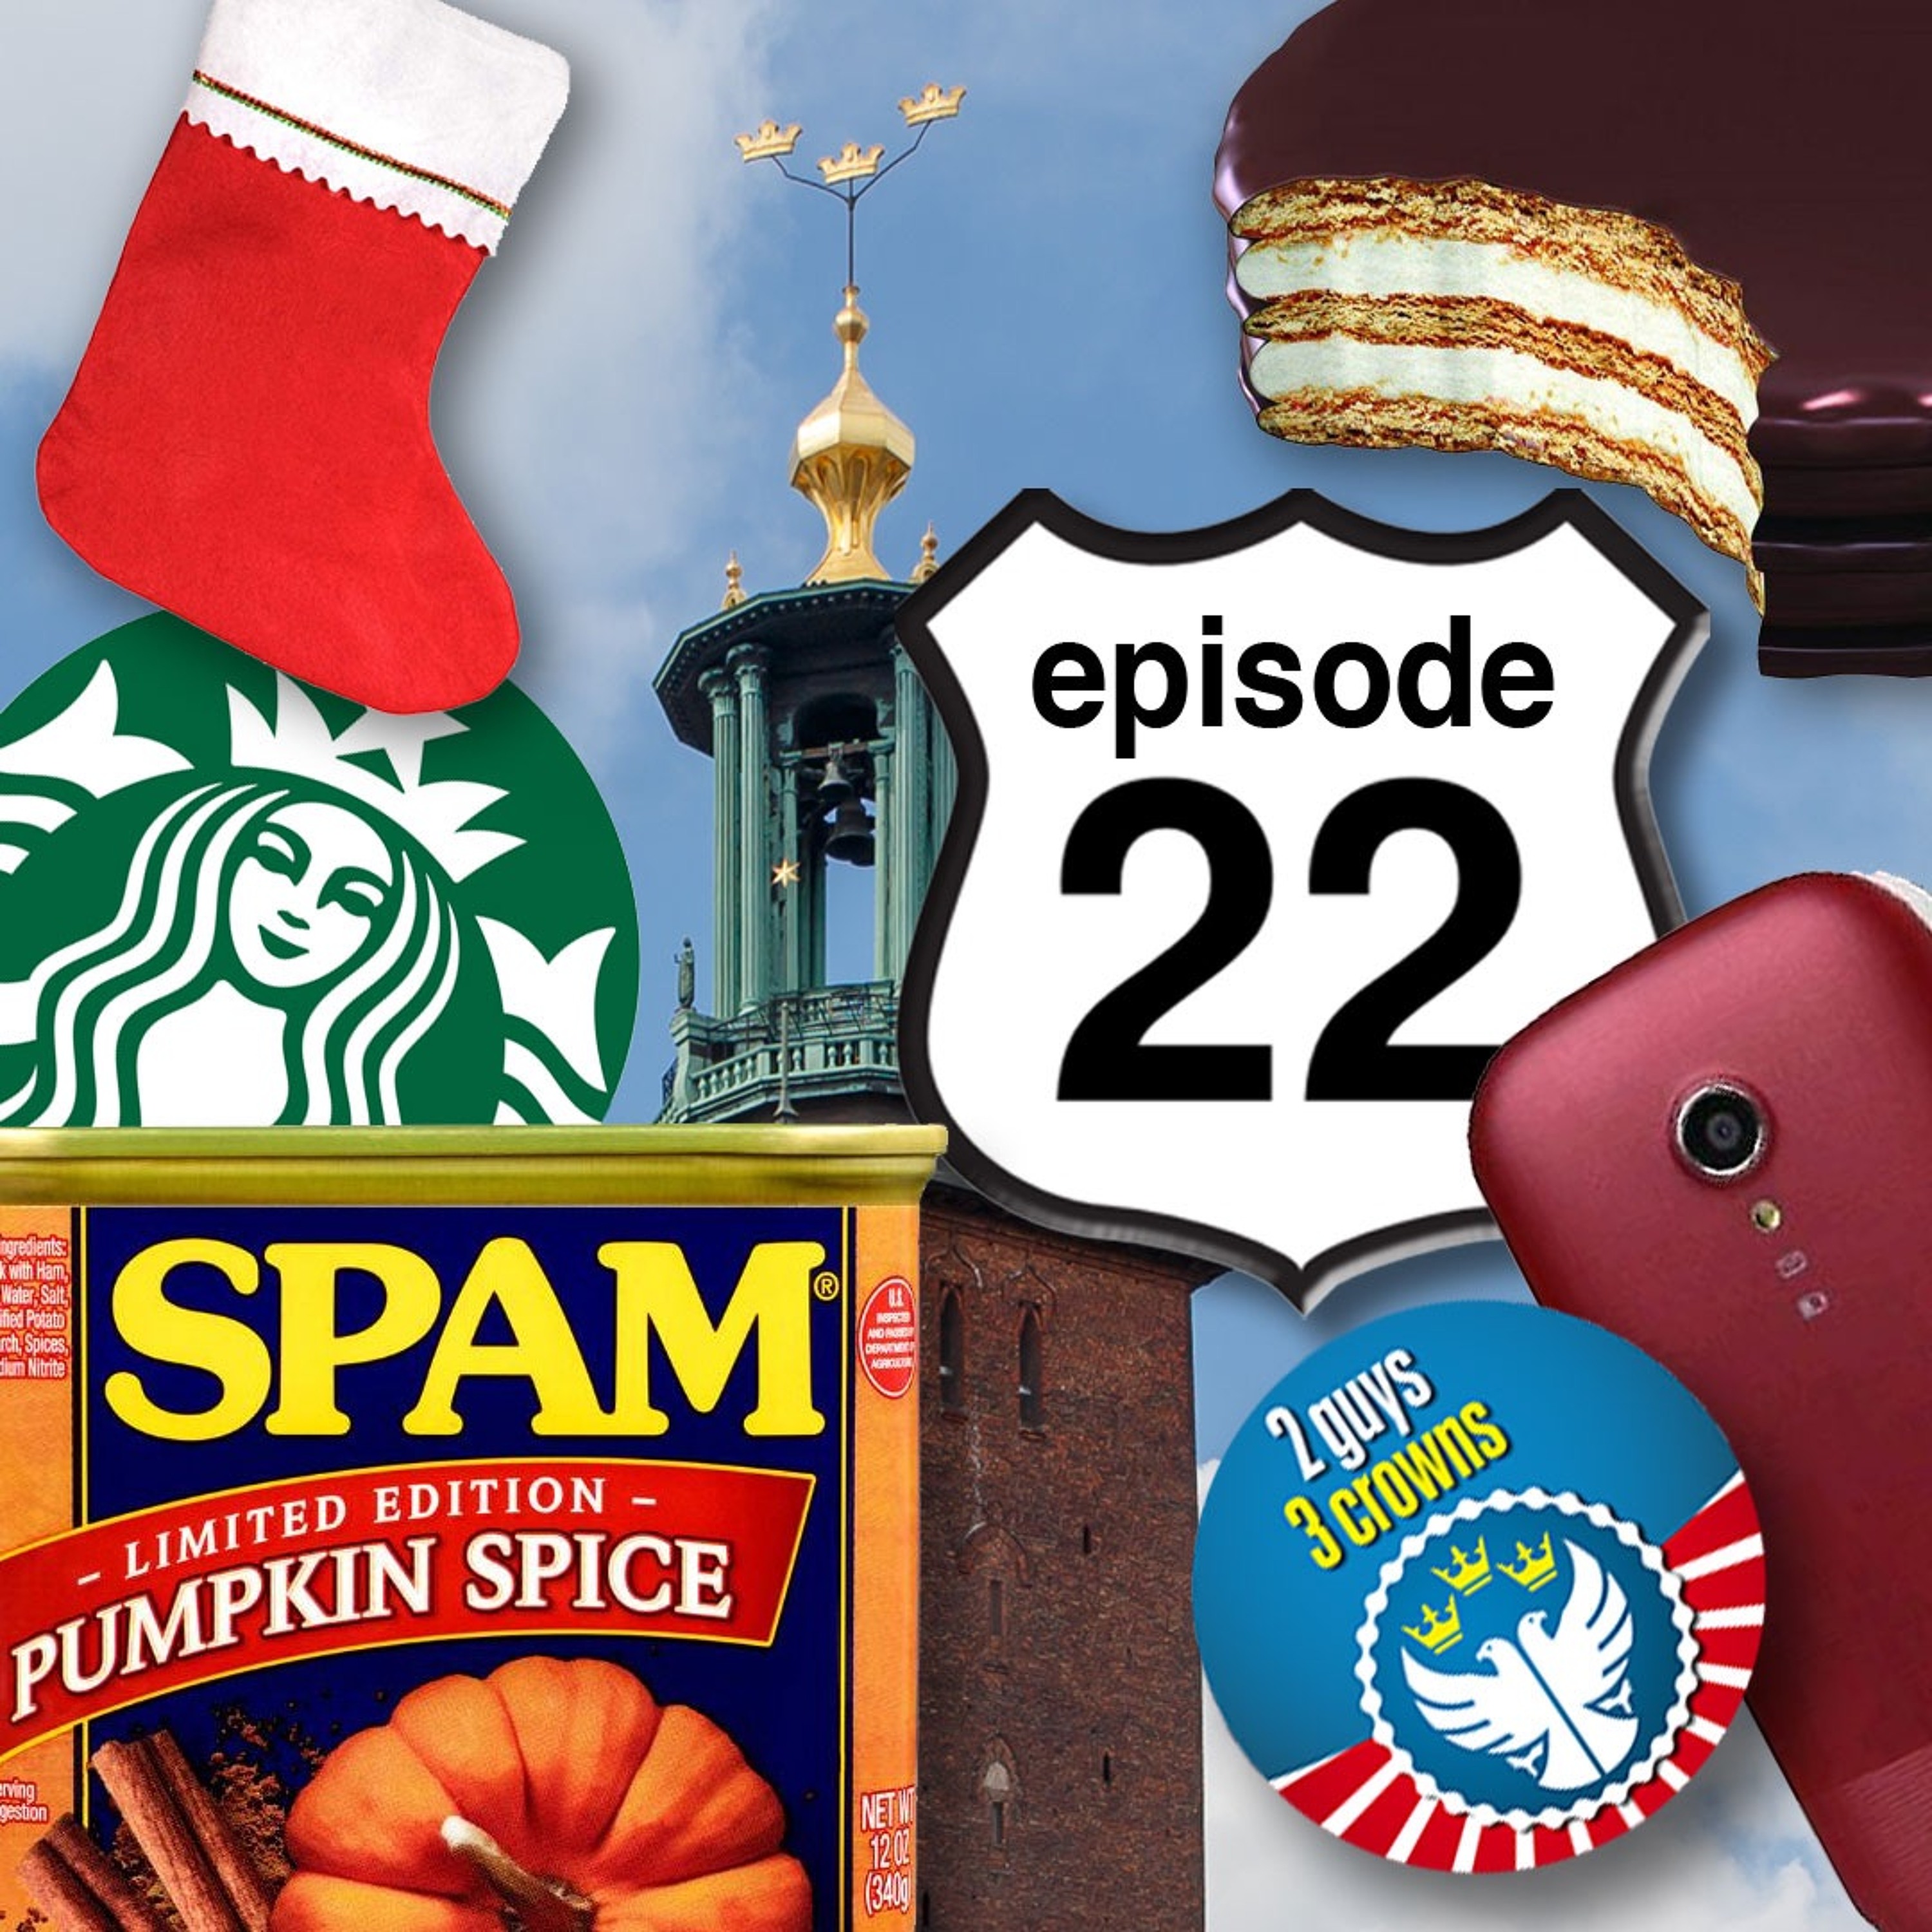 Attack Of The Pumpkin Spice Image